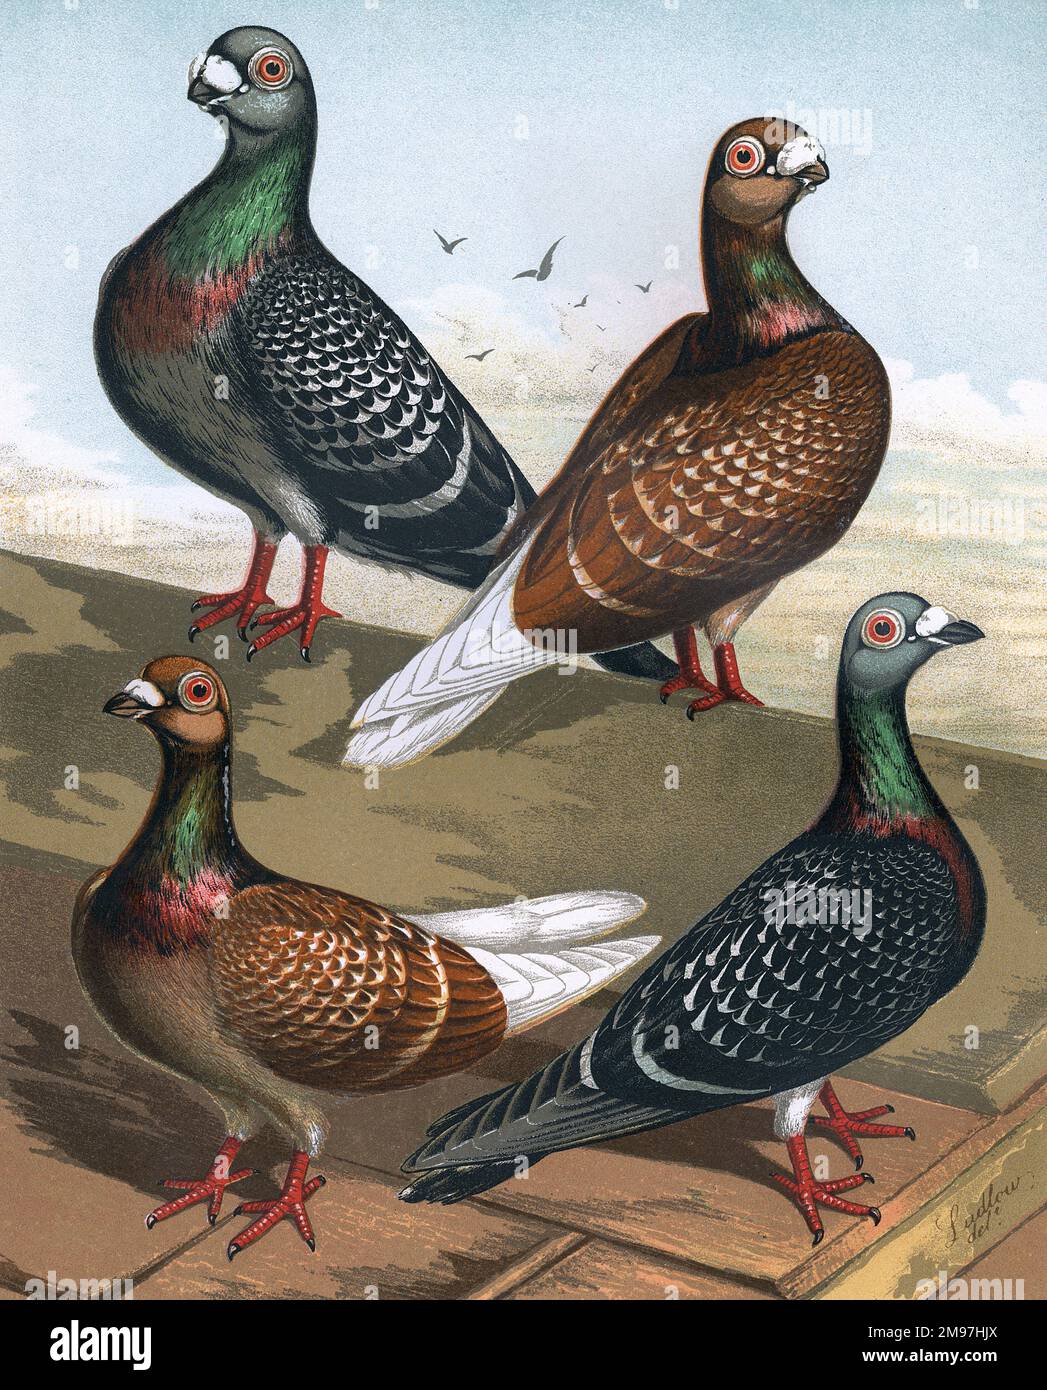 A portrait of two Show Antwerps, and two Flying Antwerps which are breed of fancy pigeon. The illustration shows the short-faced features of the show antwerp, and the long-faced features of the flying antwerps. The colouration and chequered markings on the wings are also key details. Stock Photo